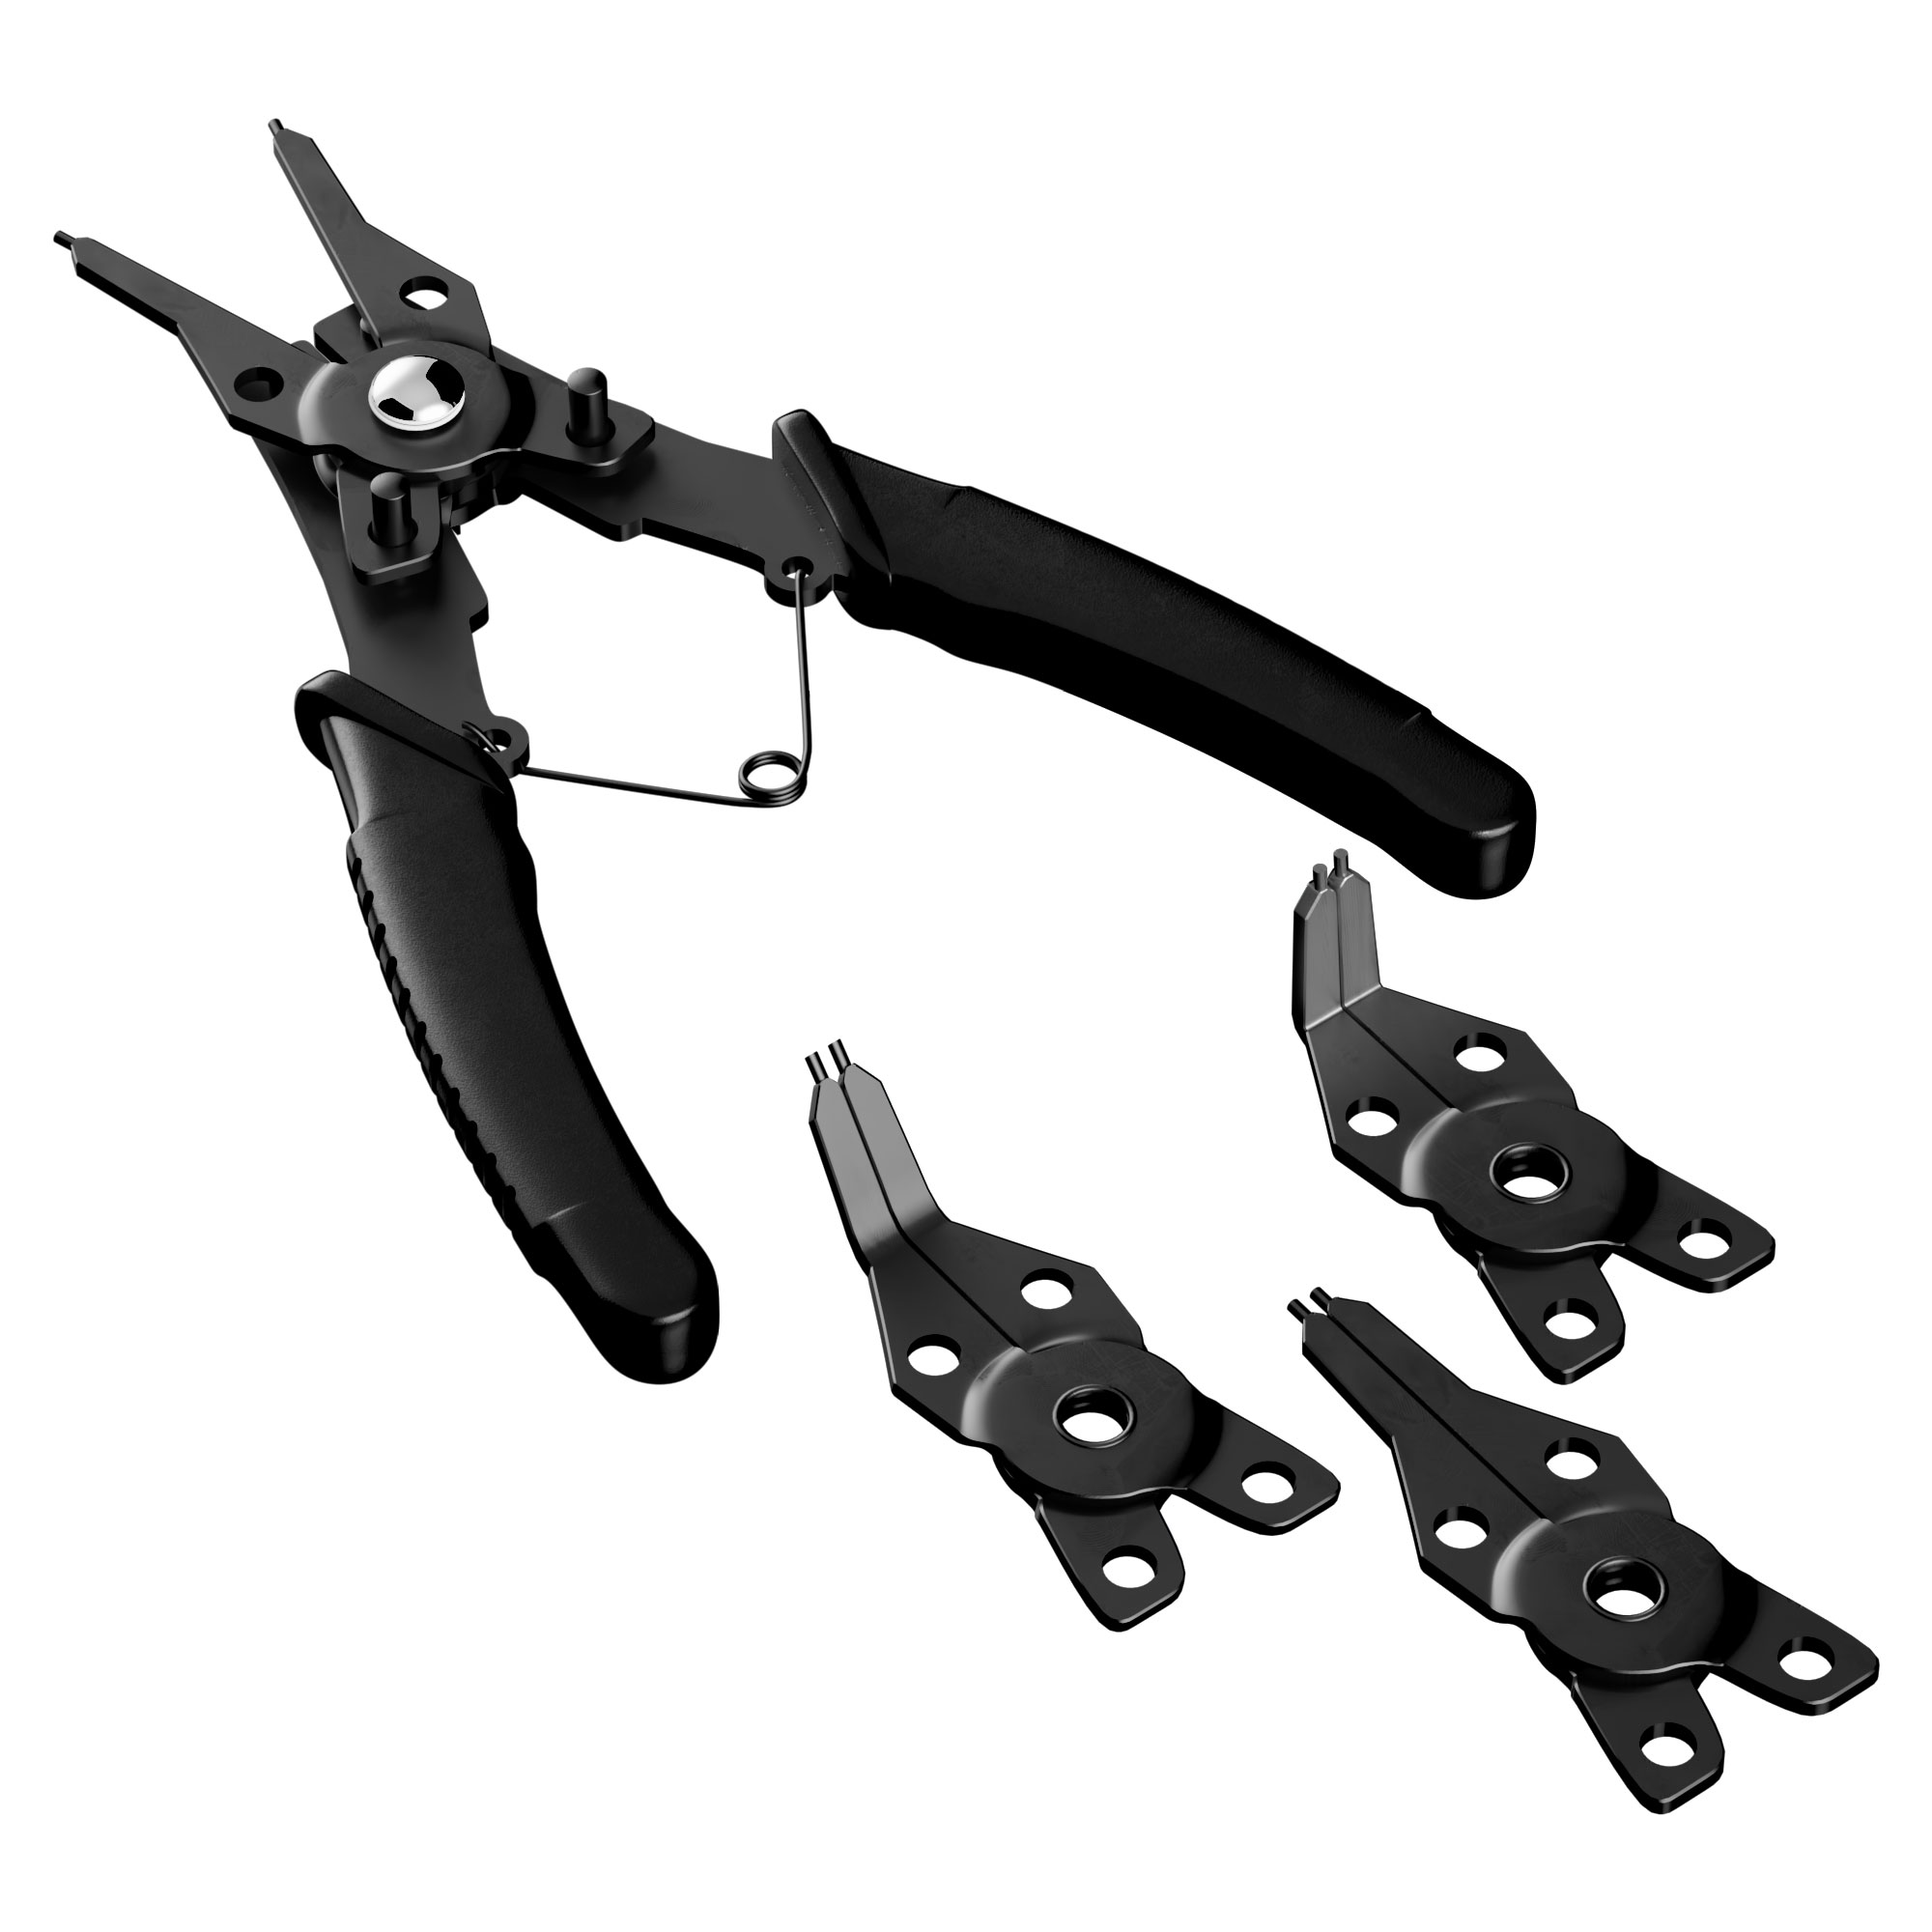 Snap Ring Pliers, Hosrnovo 4 In 1 C Clips Removal Retaining Set for  Automotive and Engine Repair, Interchangeable Jaw Head 45 90 and 180 Degree  Angled Jaws - Amazon.com